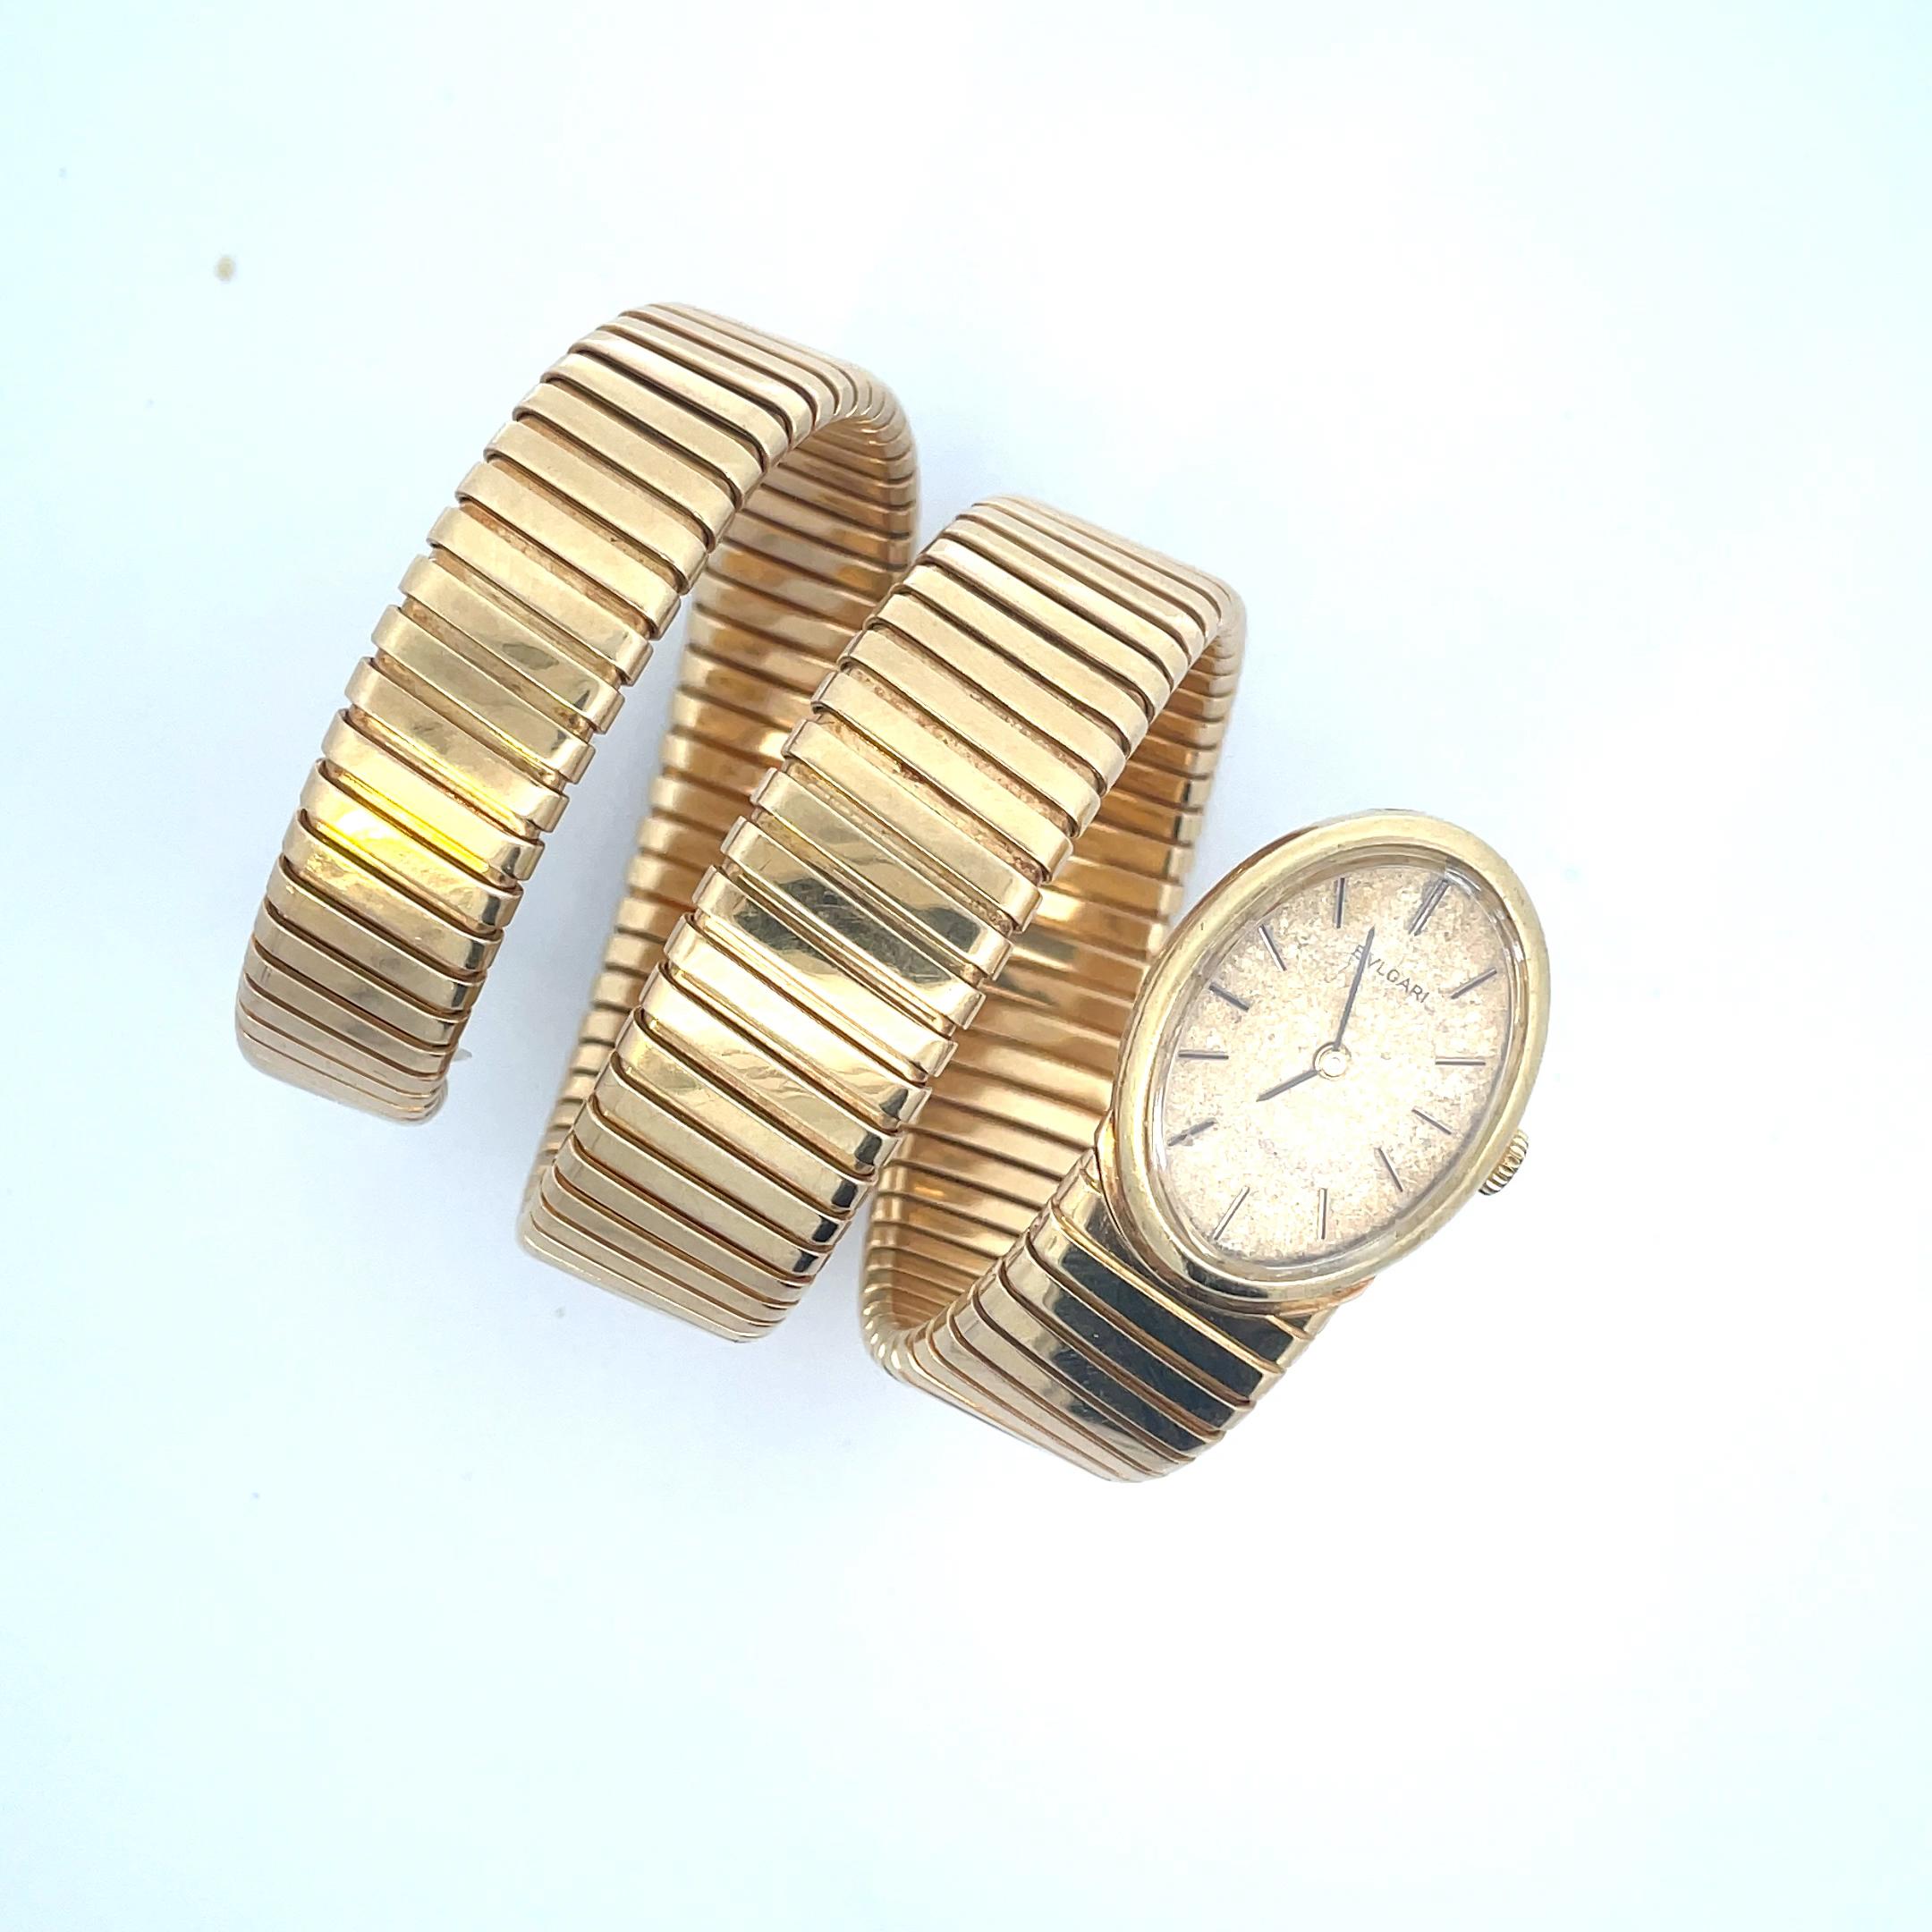 A rare Beautiful Vintage Bulgari Tubogas watch, made of 18k yellow gold, circa 1966.
The gold watch features an Oval case with a GoldAged-Champagne matte dial. The dial equipped with the gold hands.
The Movement is a Juvenia Manual winding, the case